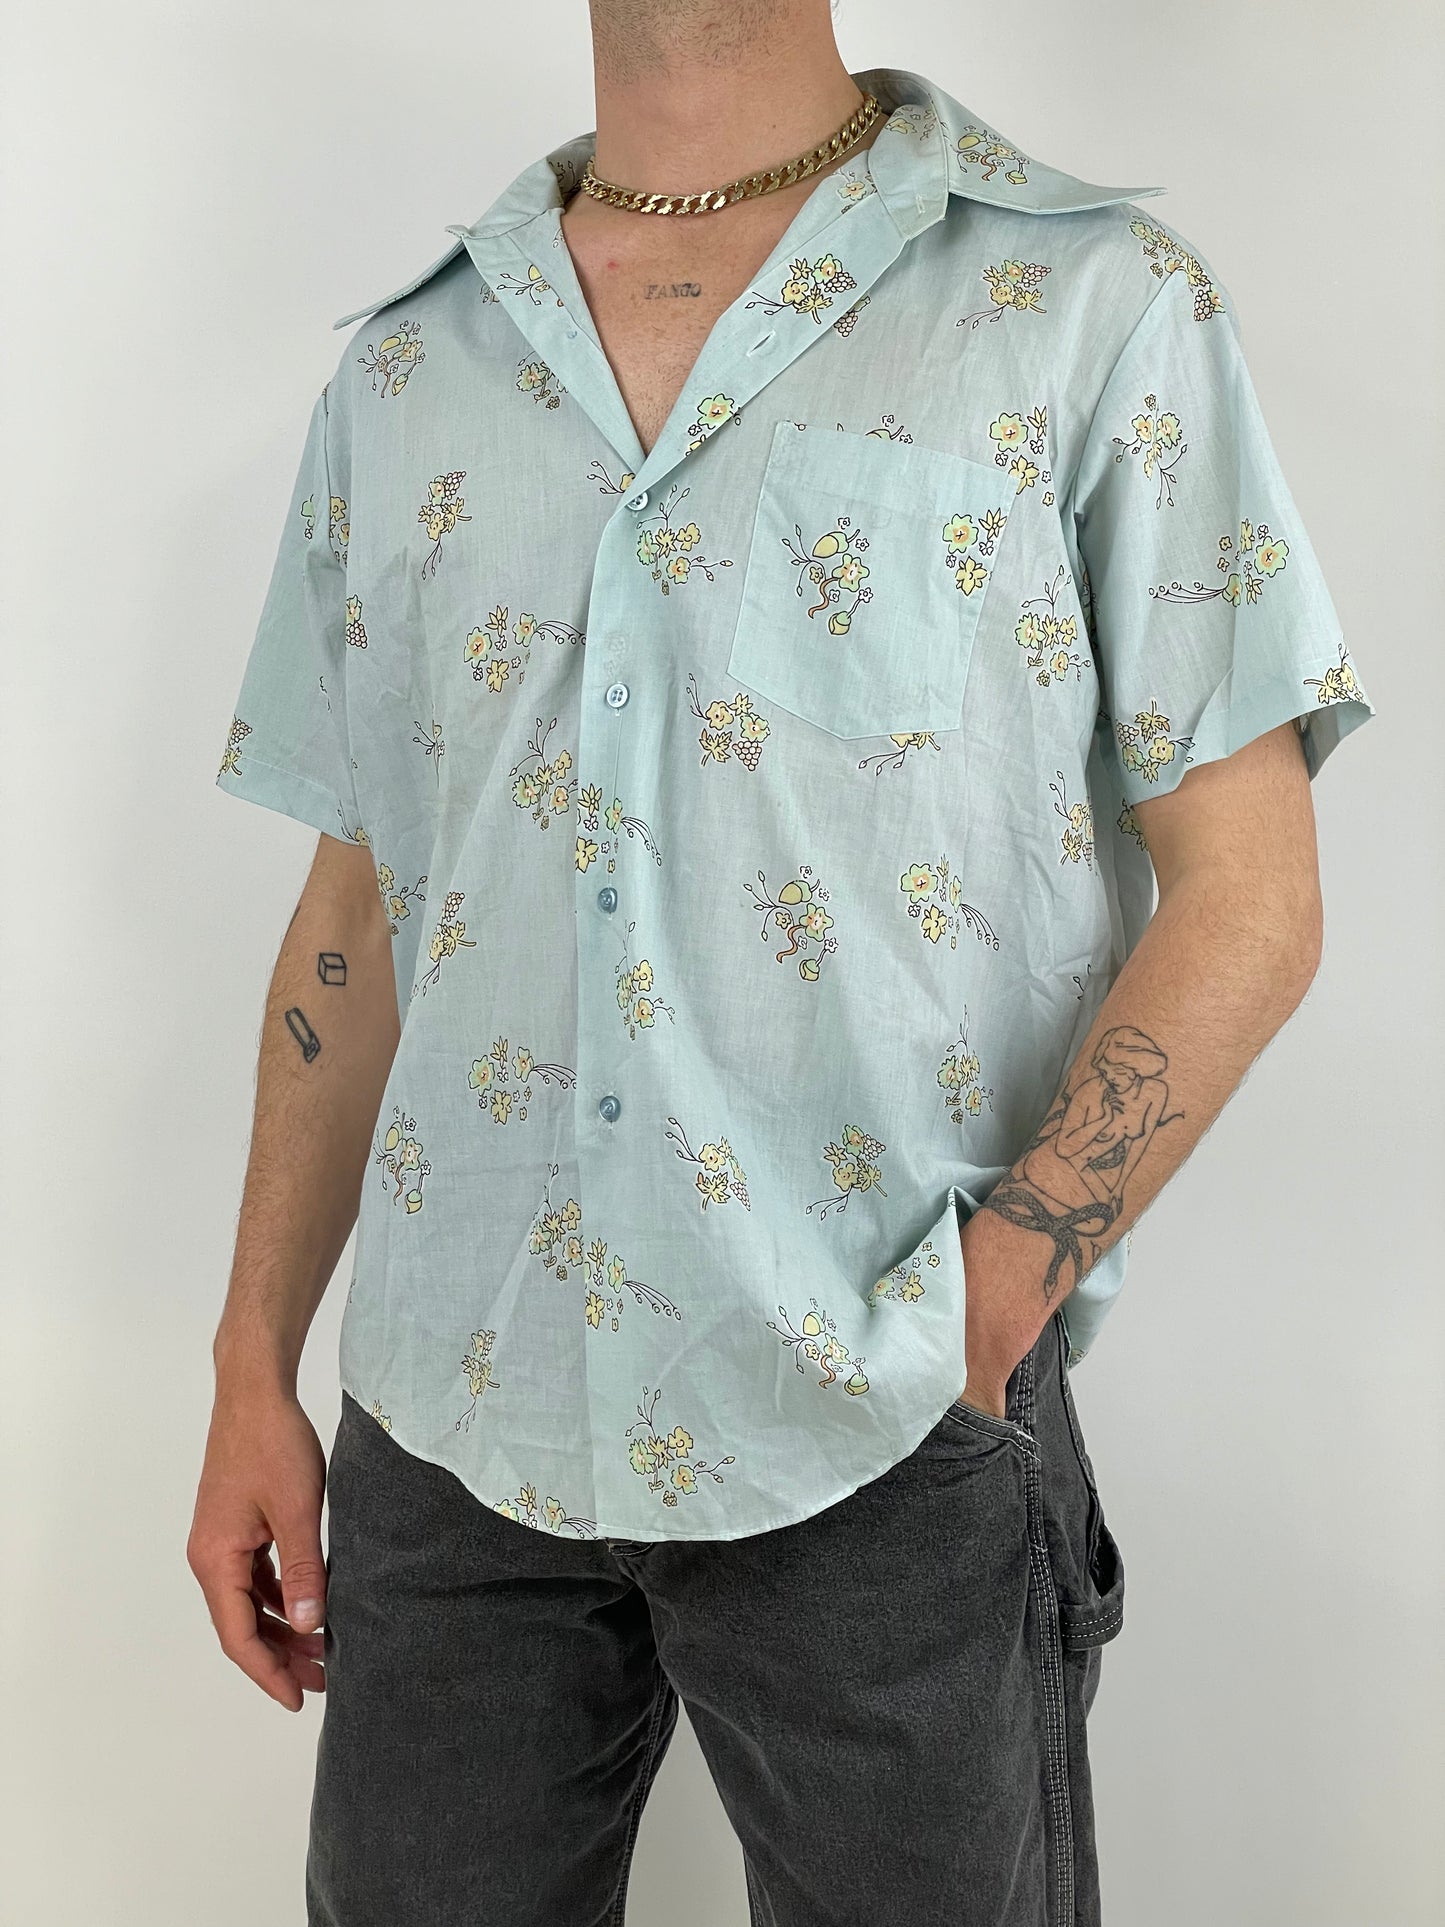 FRUIT OF THE LOOM shirt